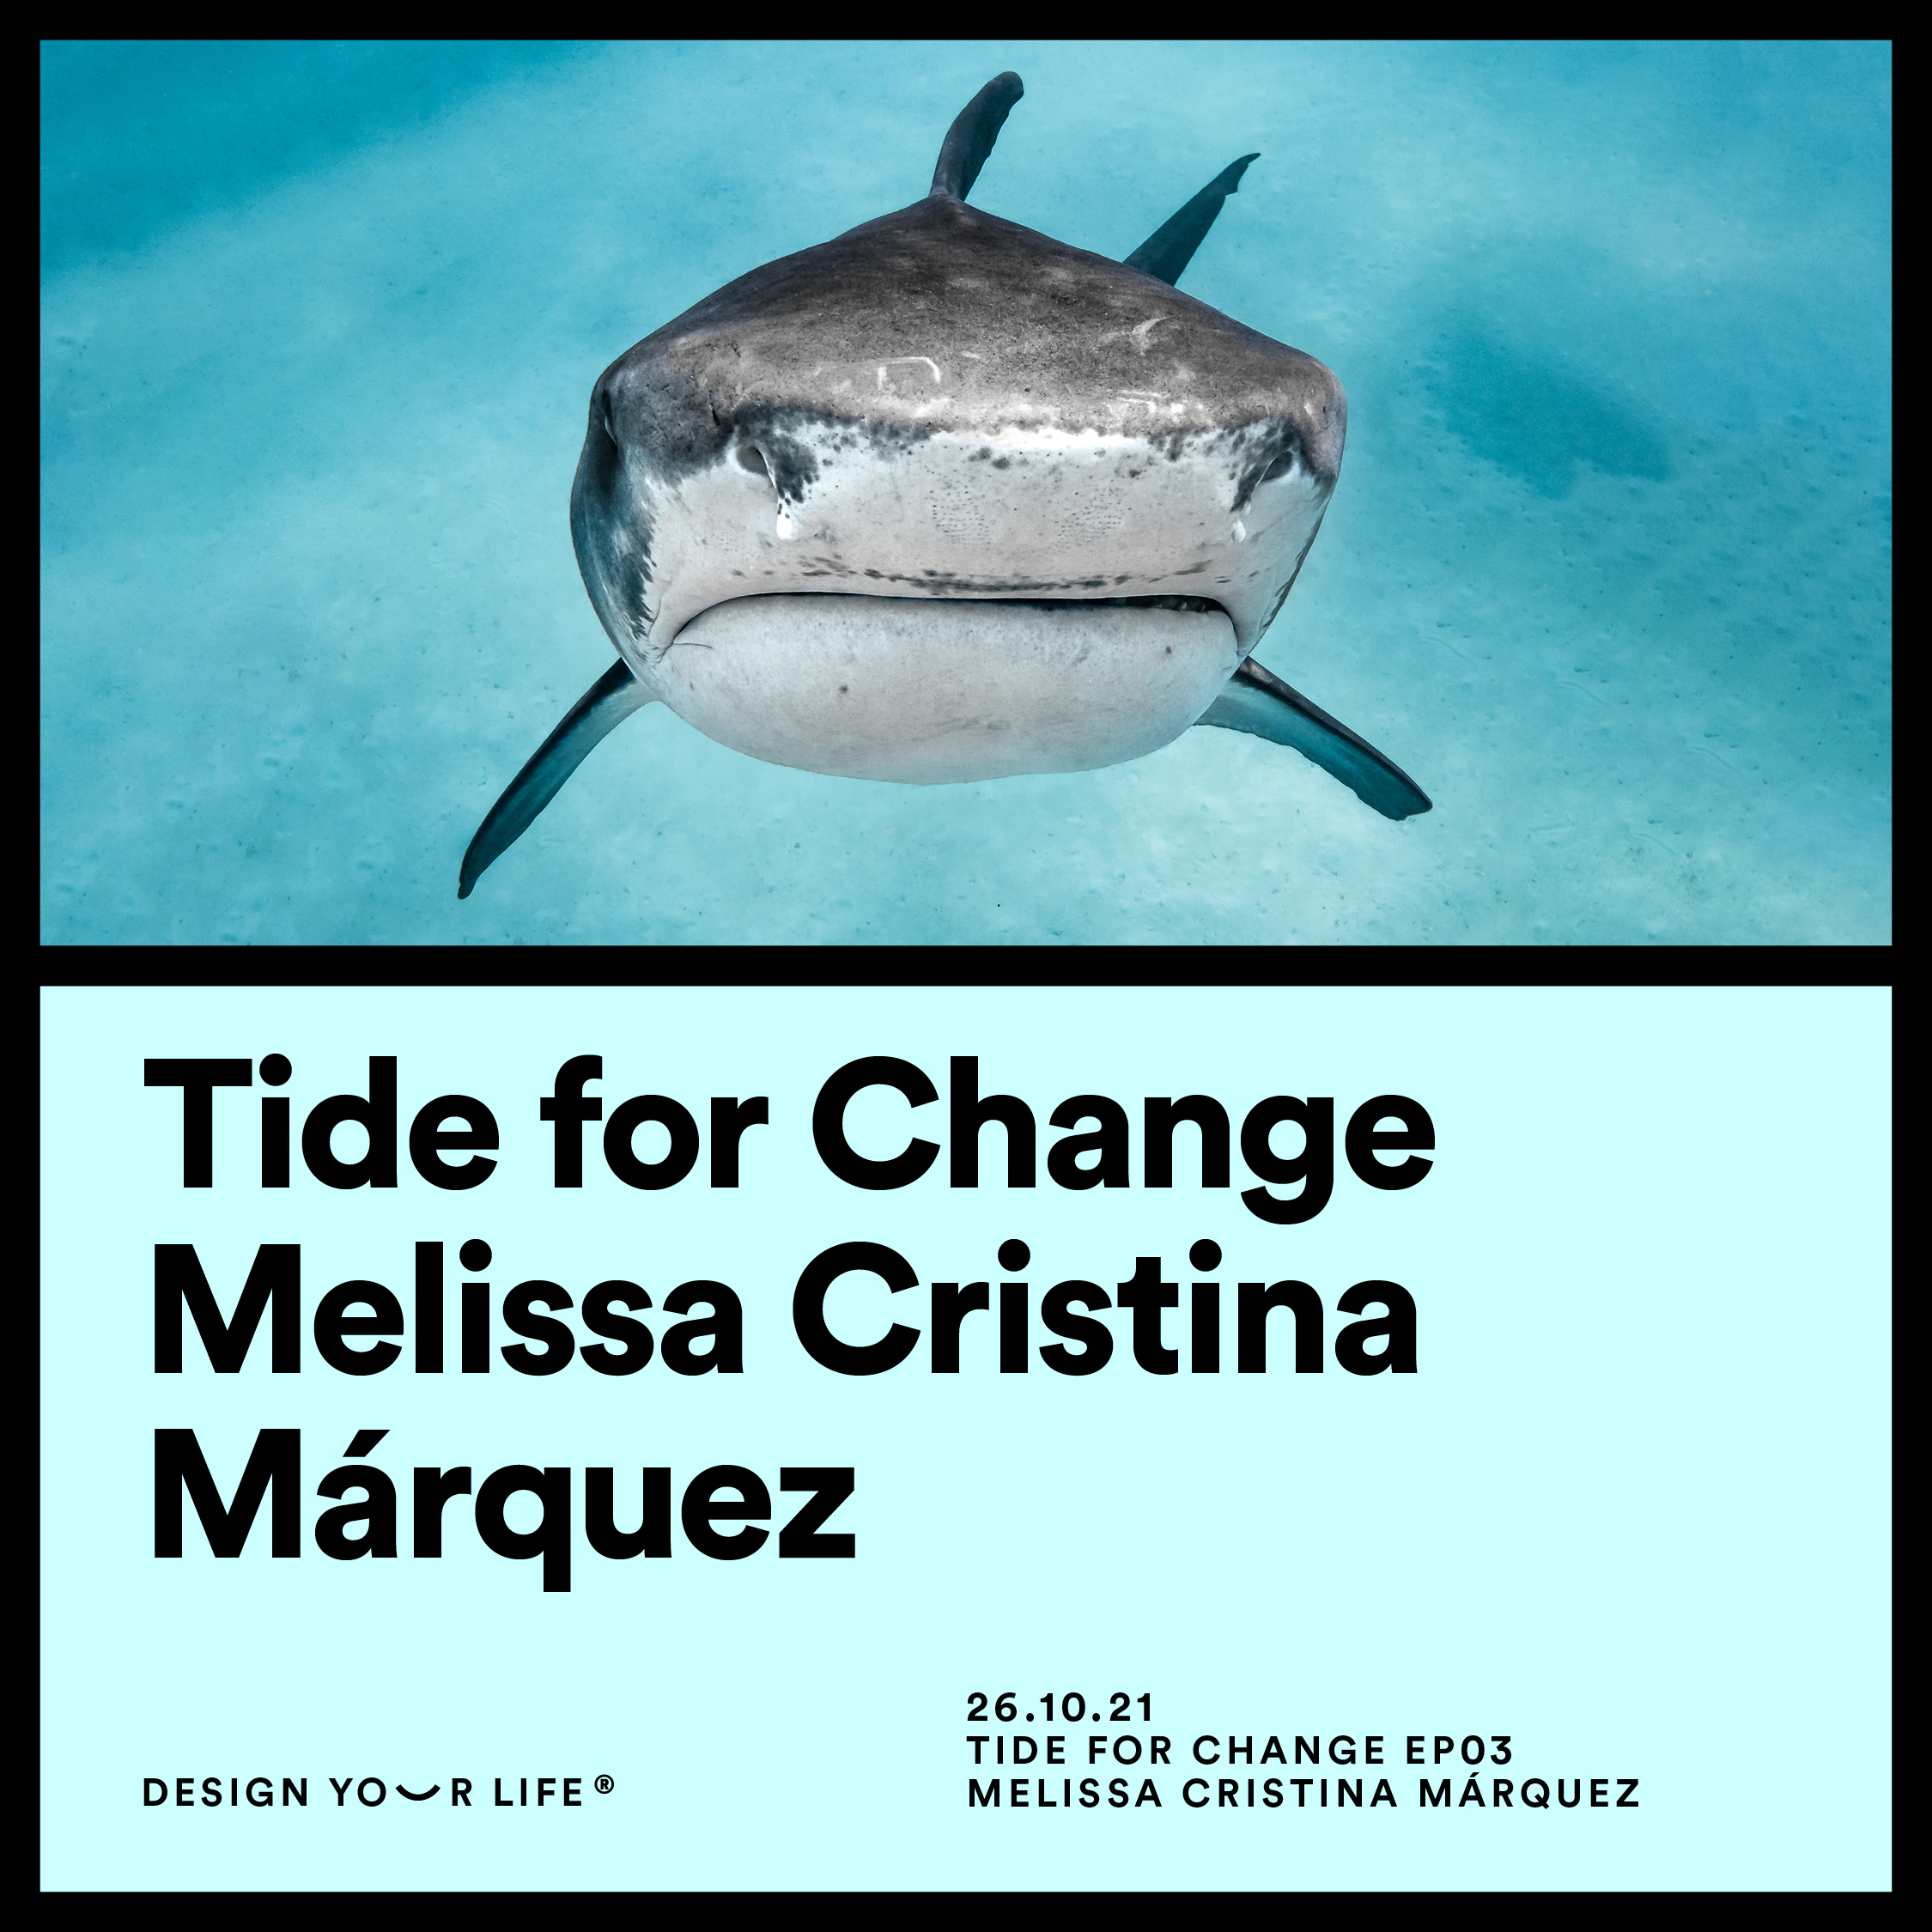 Designing a life dedicated to science with Melissa Cristina Márquez